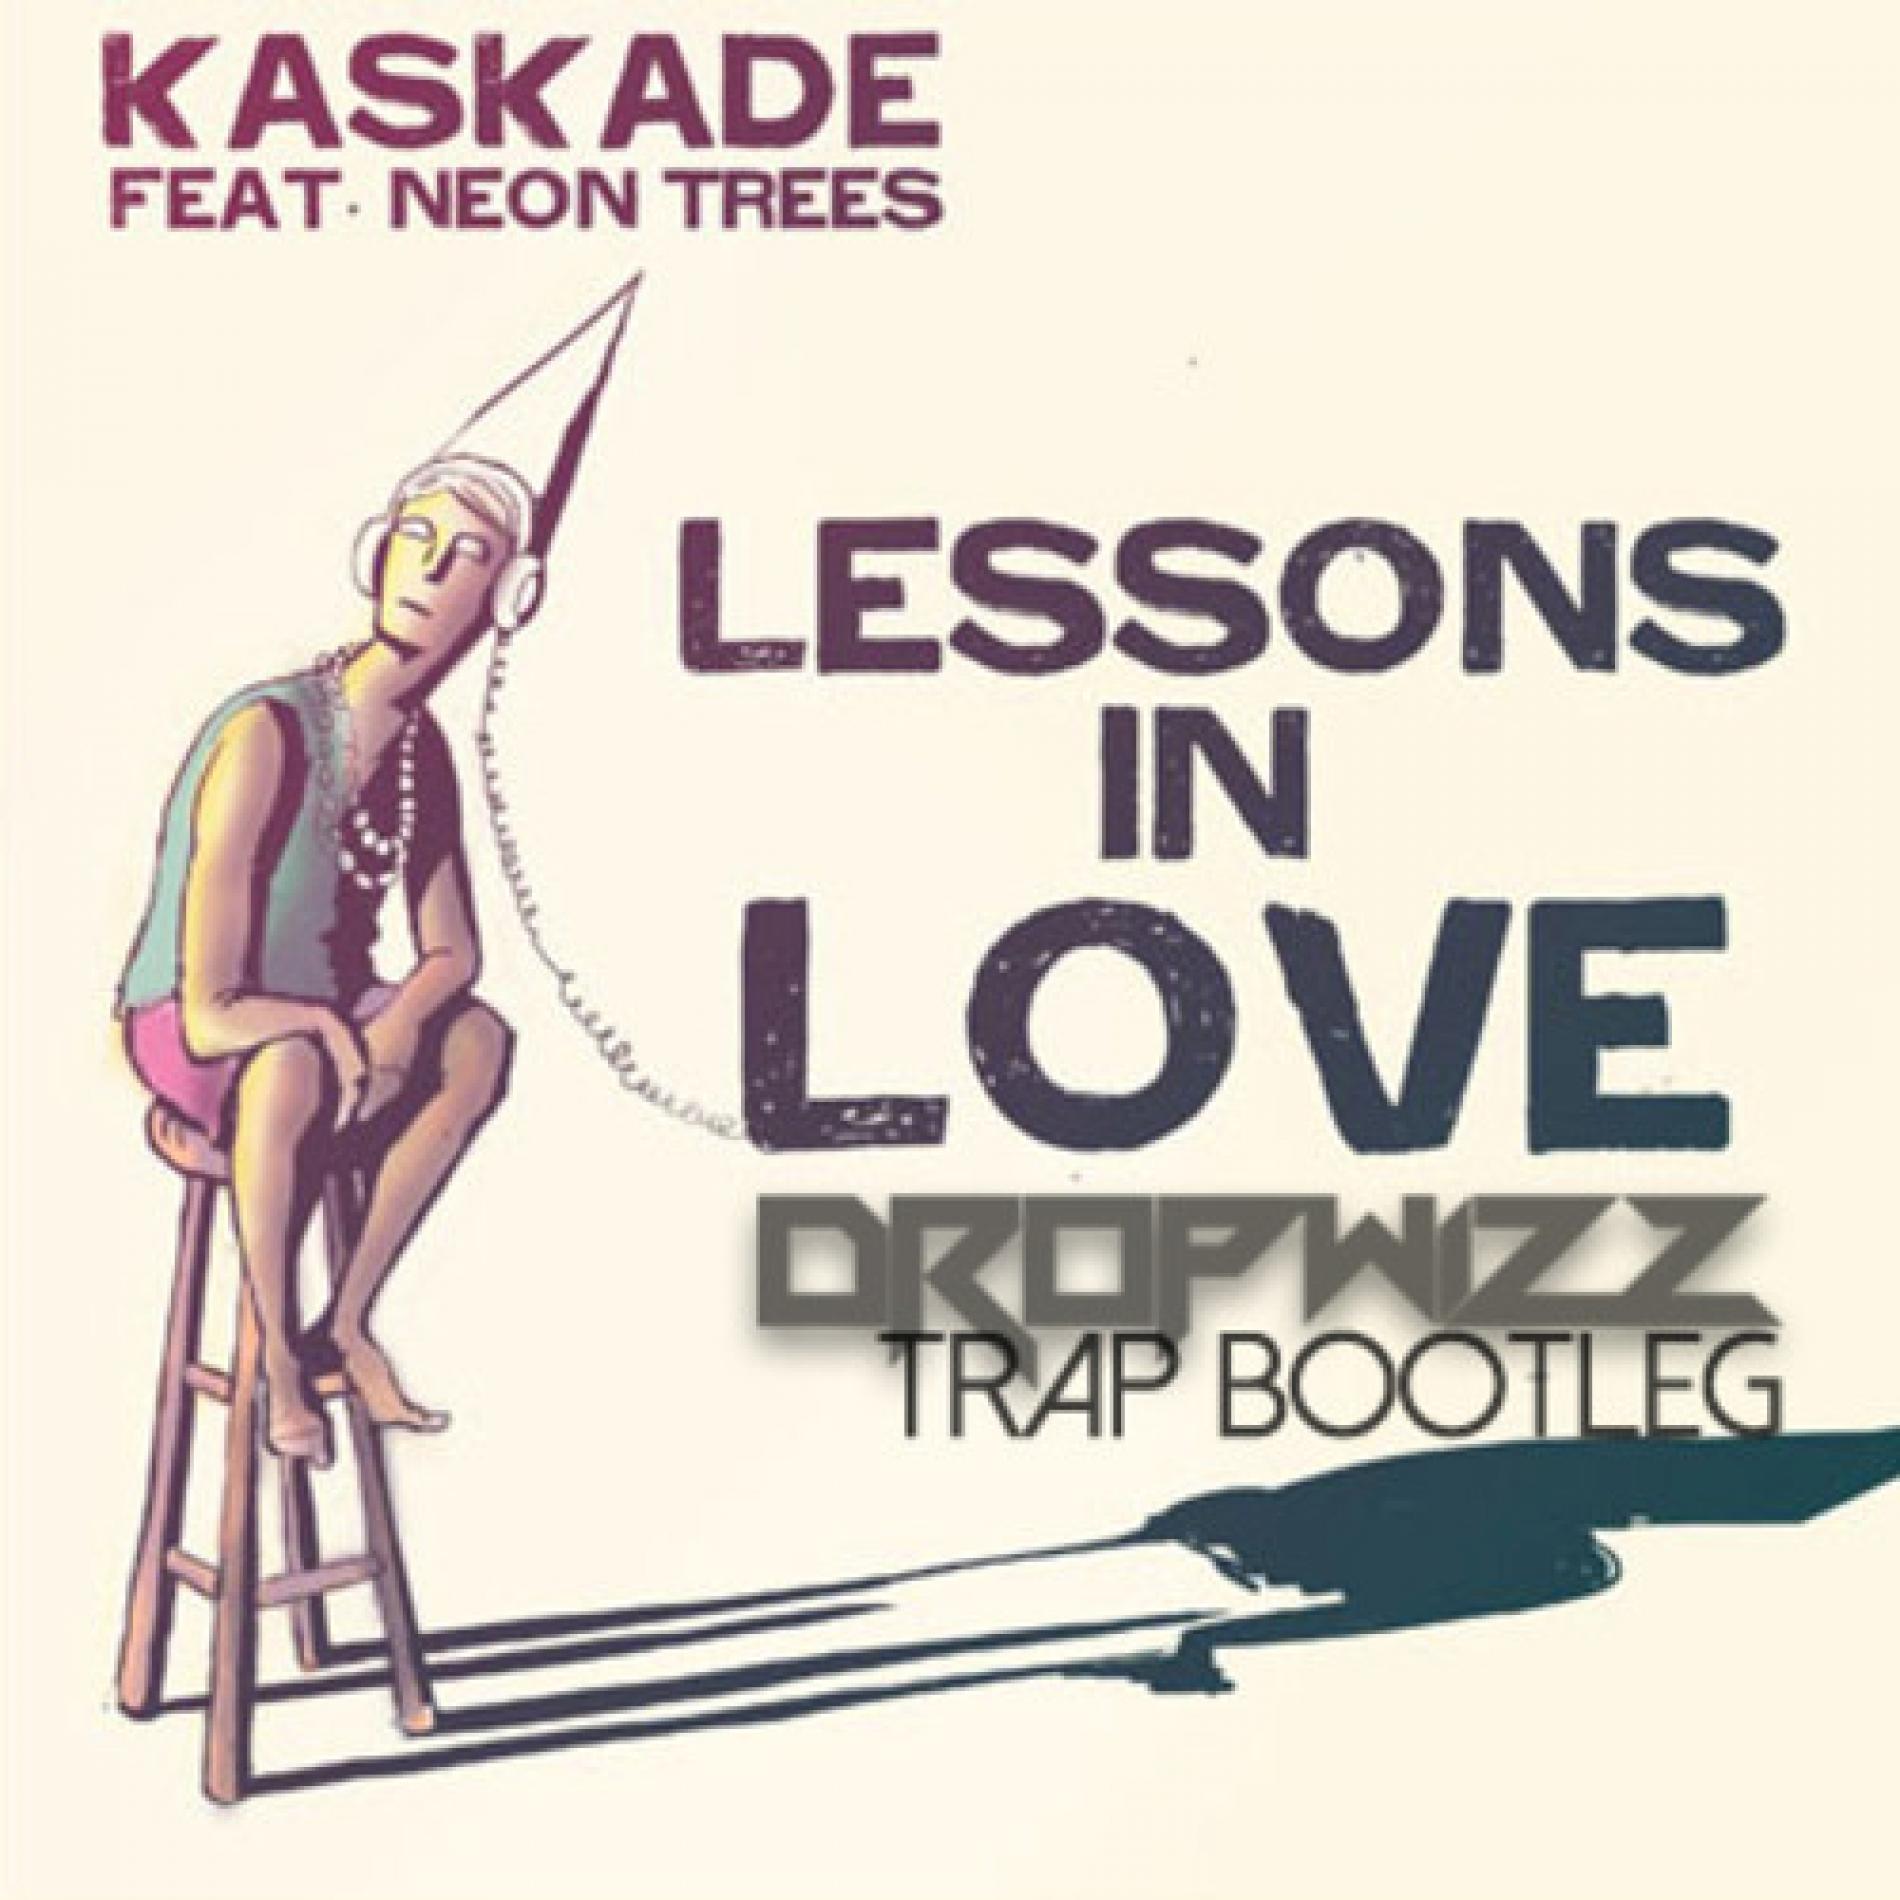 Kaskade ft. Neon Trees – Lessons In Love (Dropwizz Chilled Trapleg)